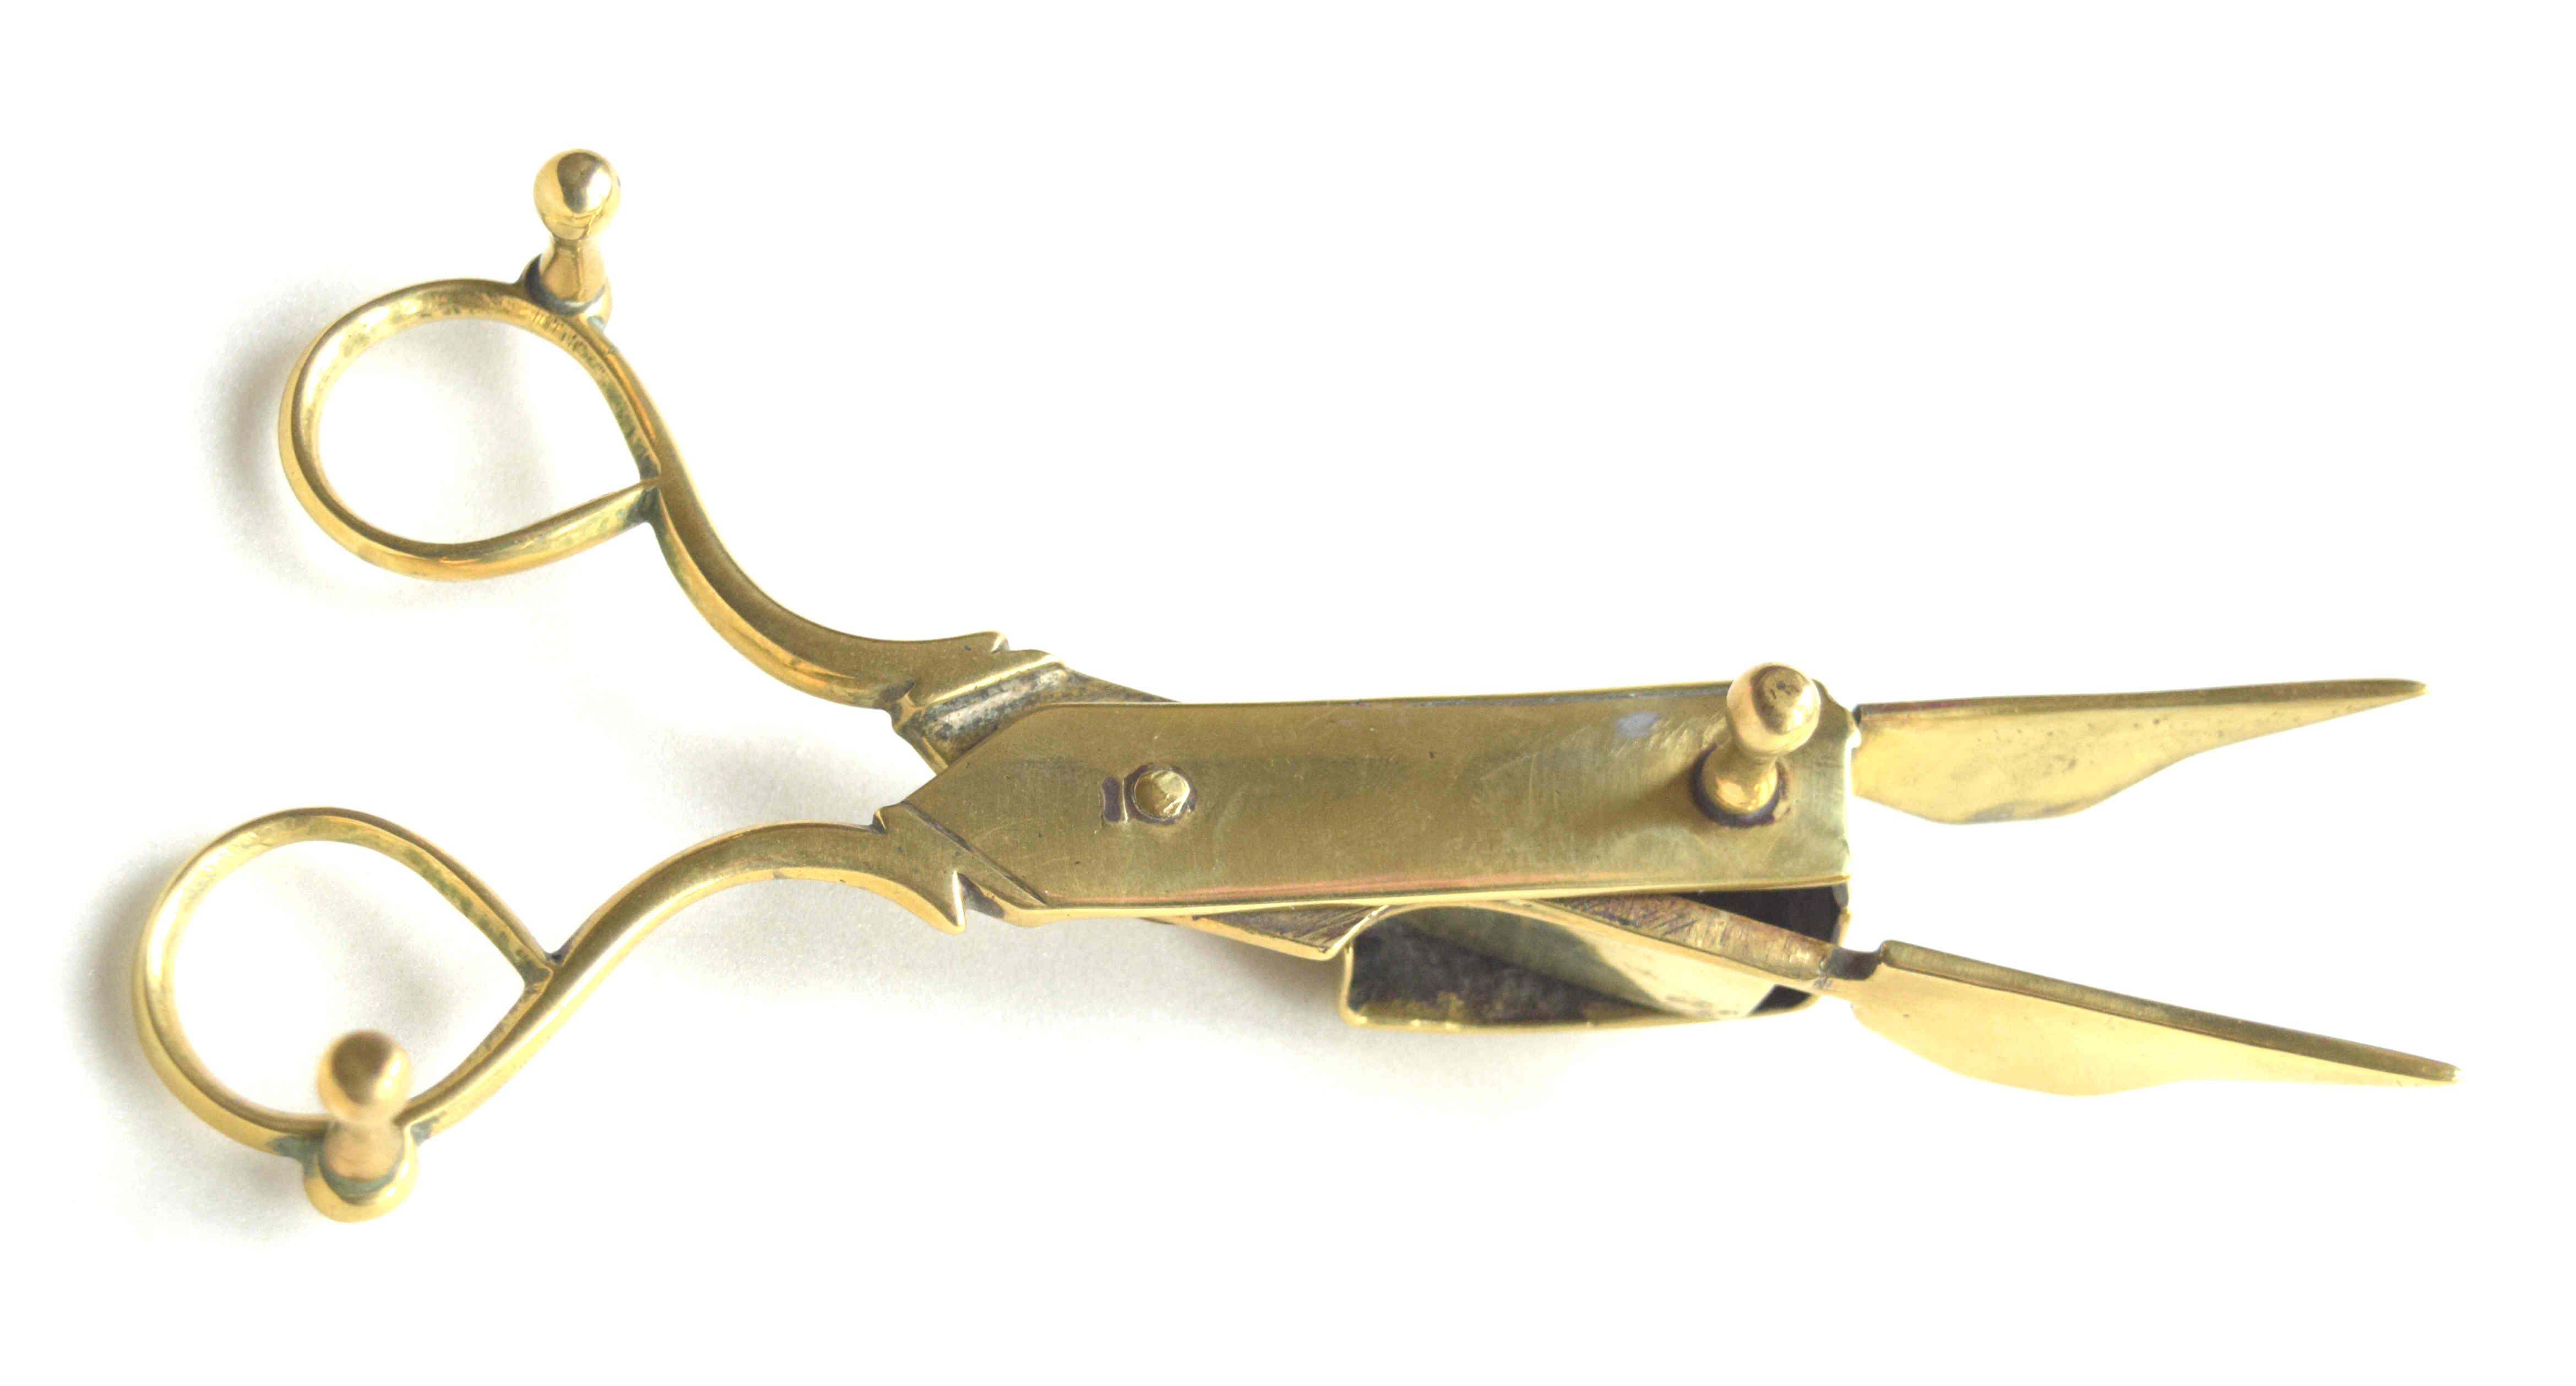 Candle Snuffer and Douter – Antique Metalware Society